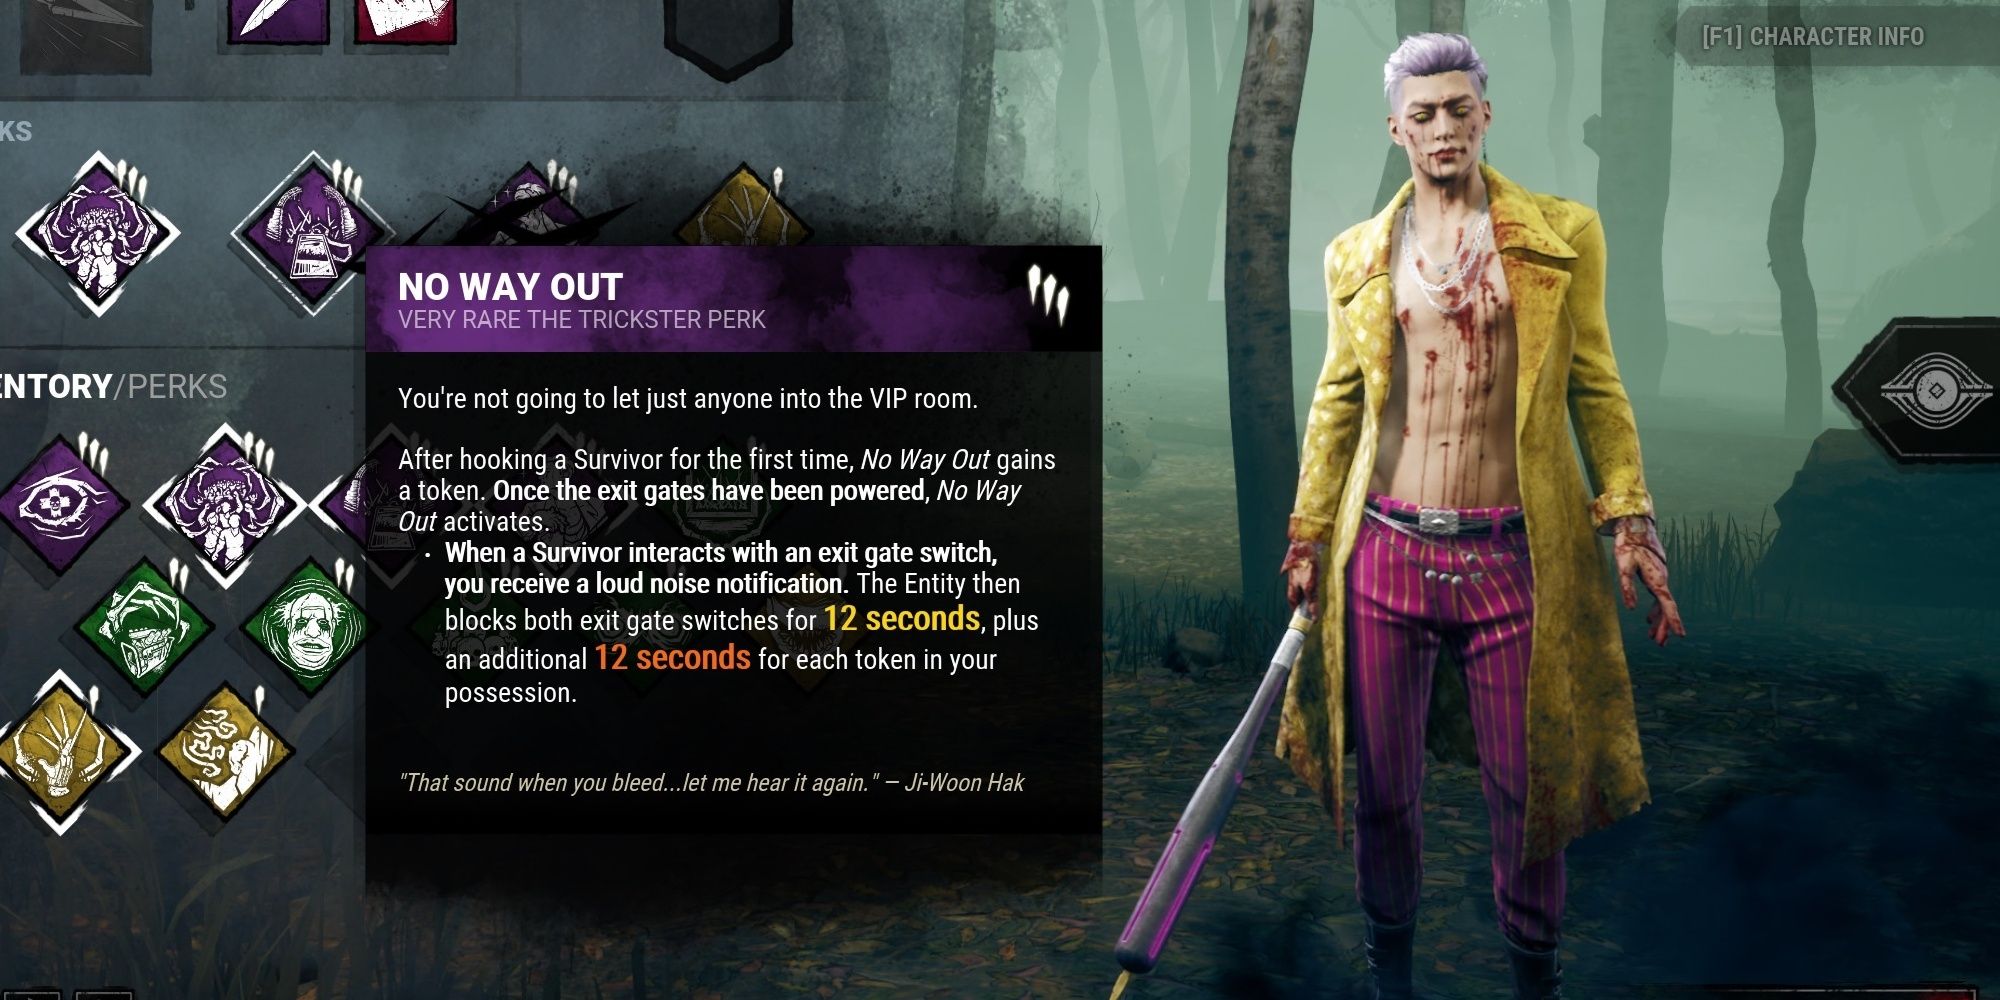 No Way Out is a Trickster teachable perk available at level 40 of his Bloodweb.